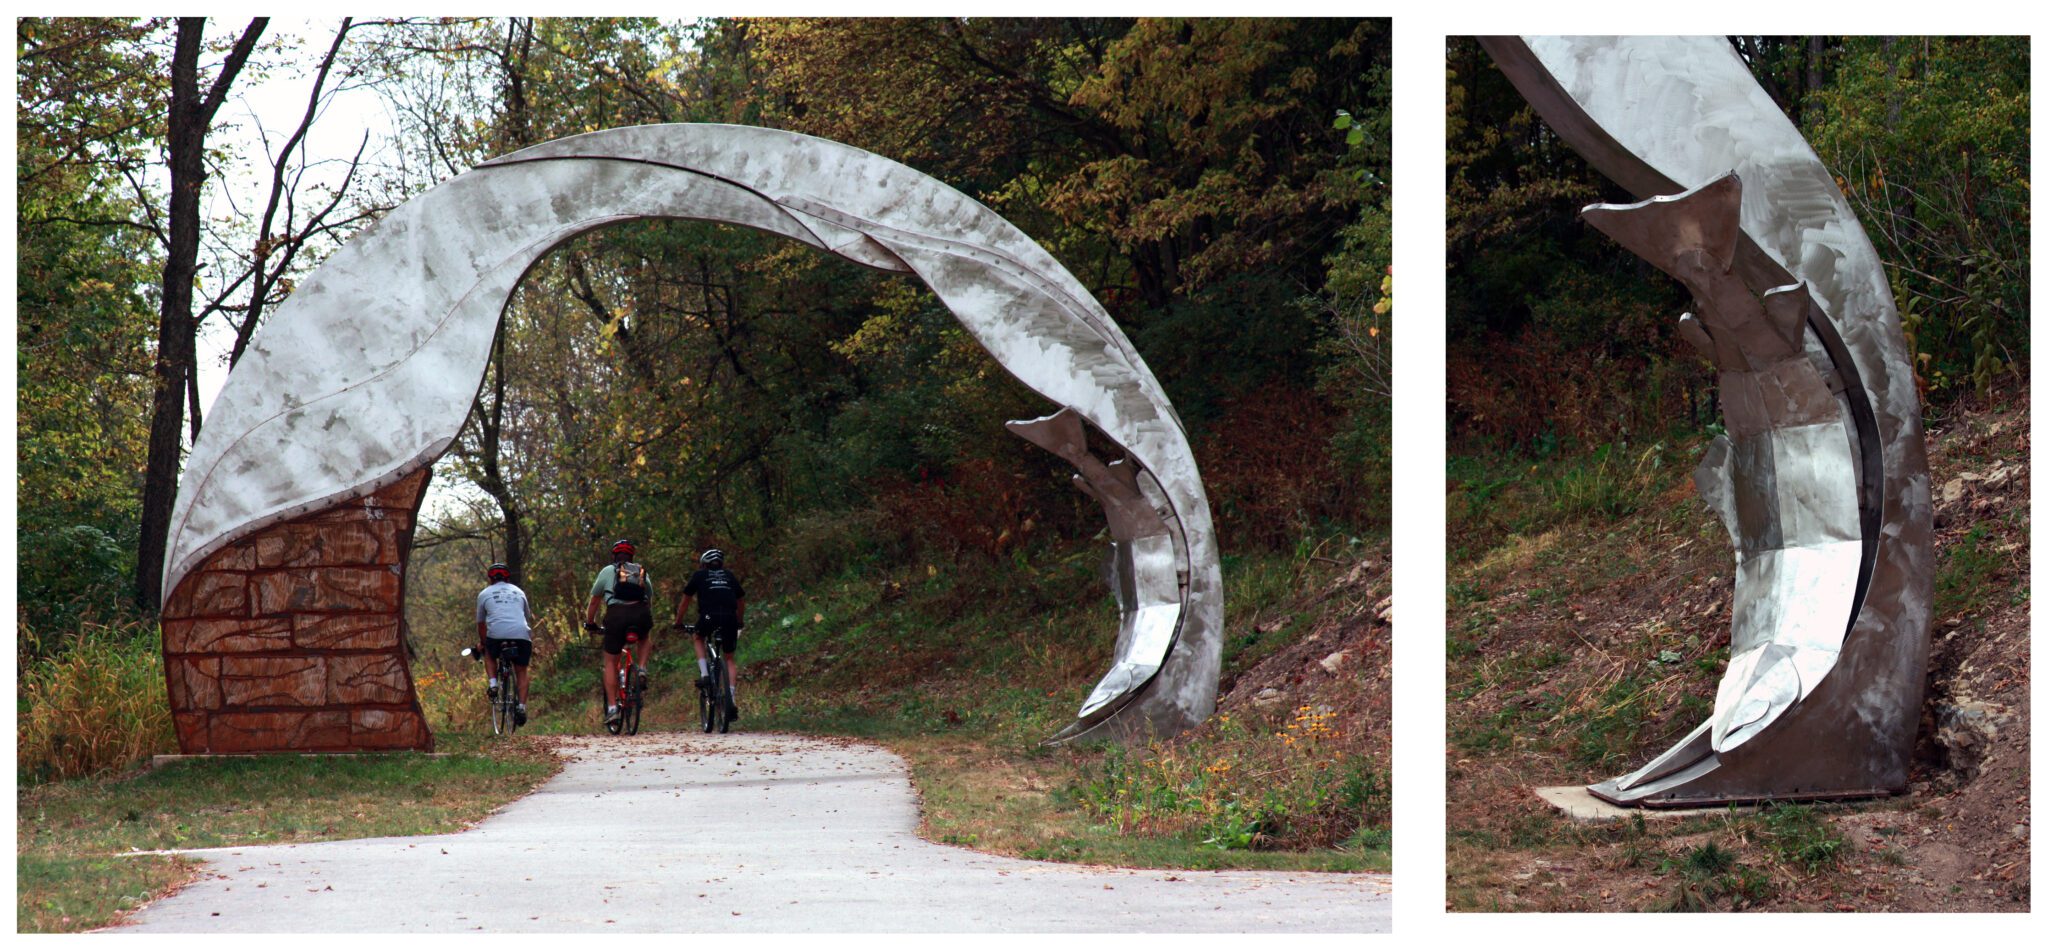 River Arch stainless and Corten steel) by Bounnak Thammavong, installed on the Trout Run Trail, Decorah, Iowa